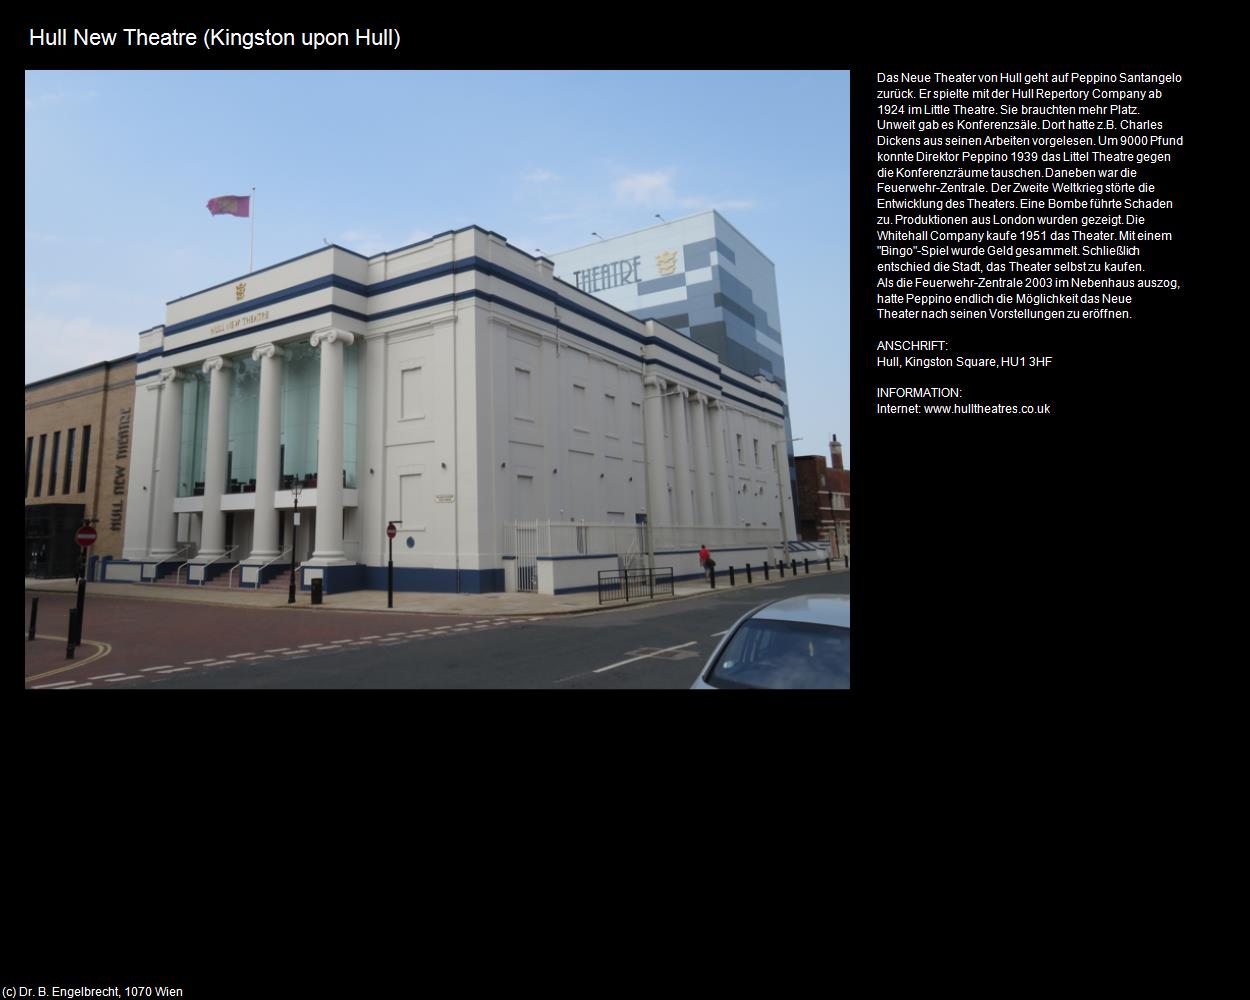 Hull New Theatre  (Kingston upon Hull, England) in Kulturatlas-ENGLAND und WALES